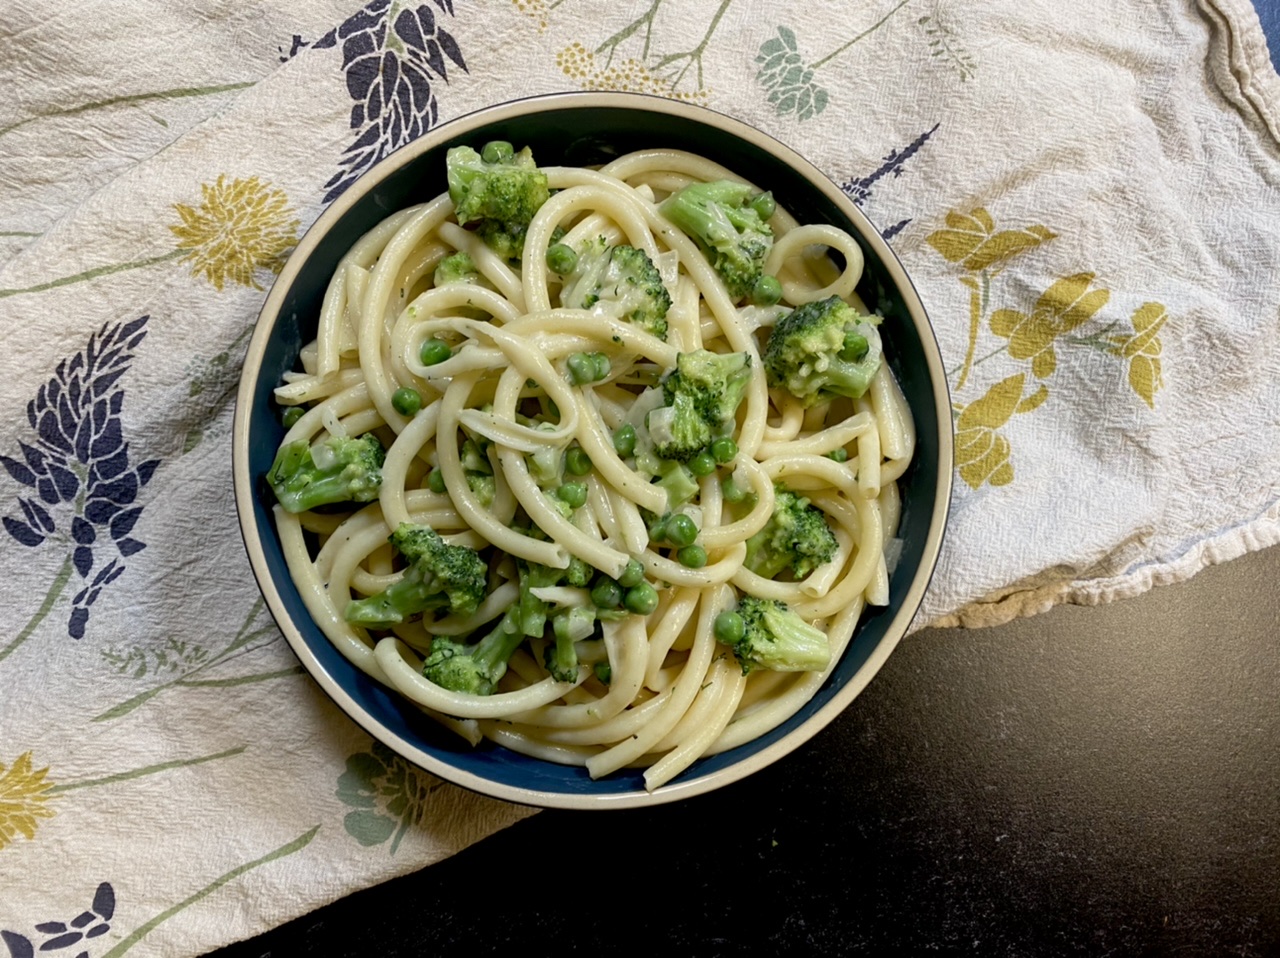 Mustard cheddar vegetarian pasta with broccoli and peas in a bowl on top of a white towel